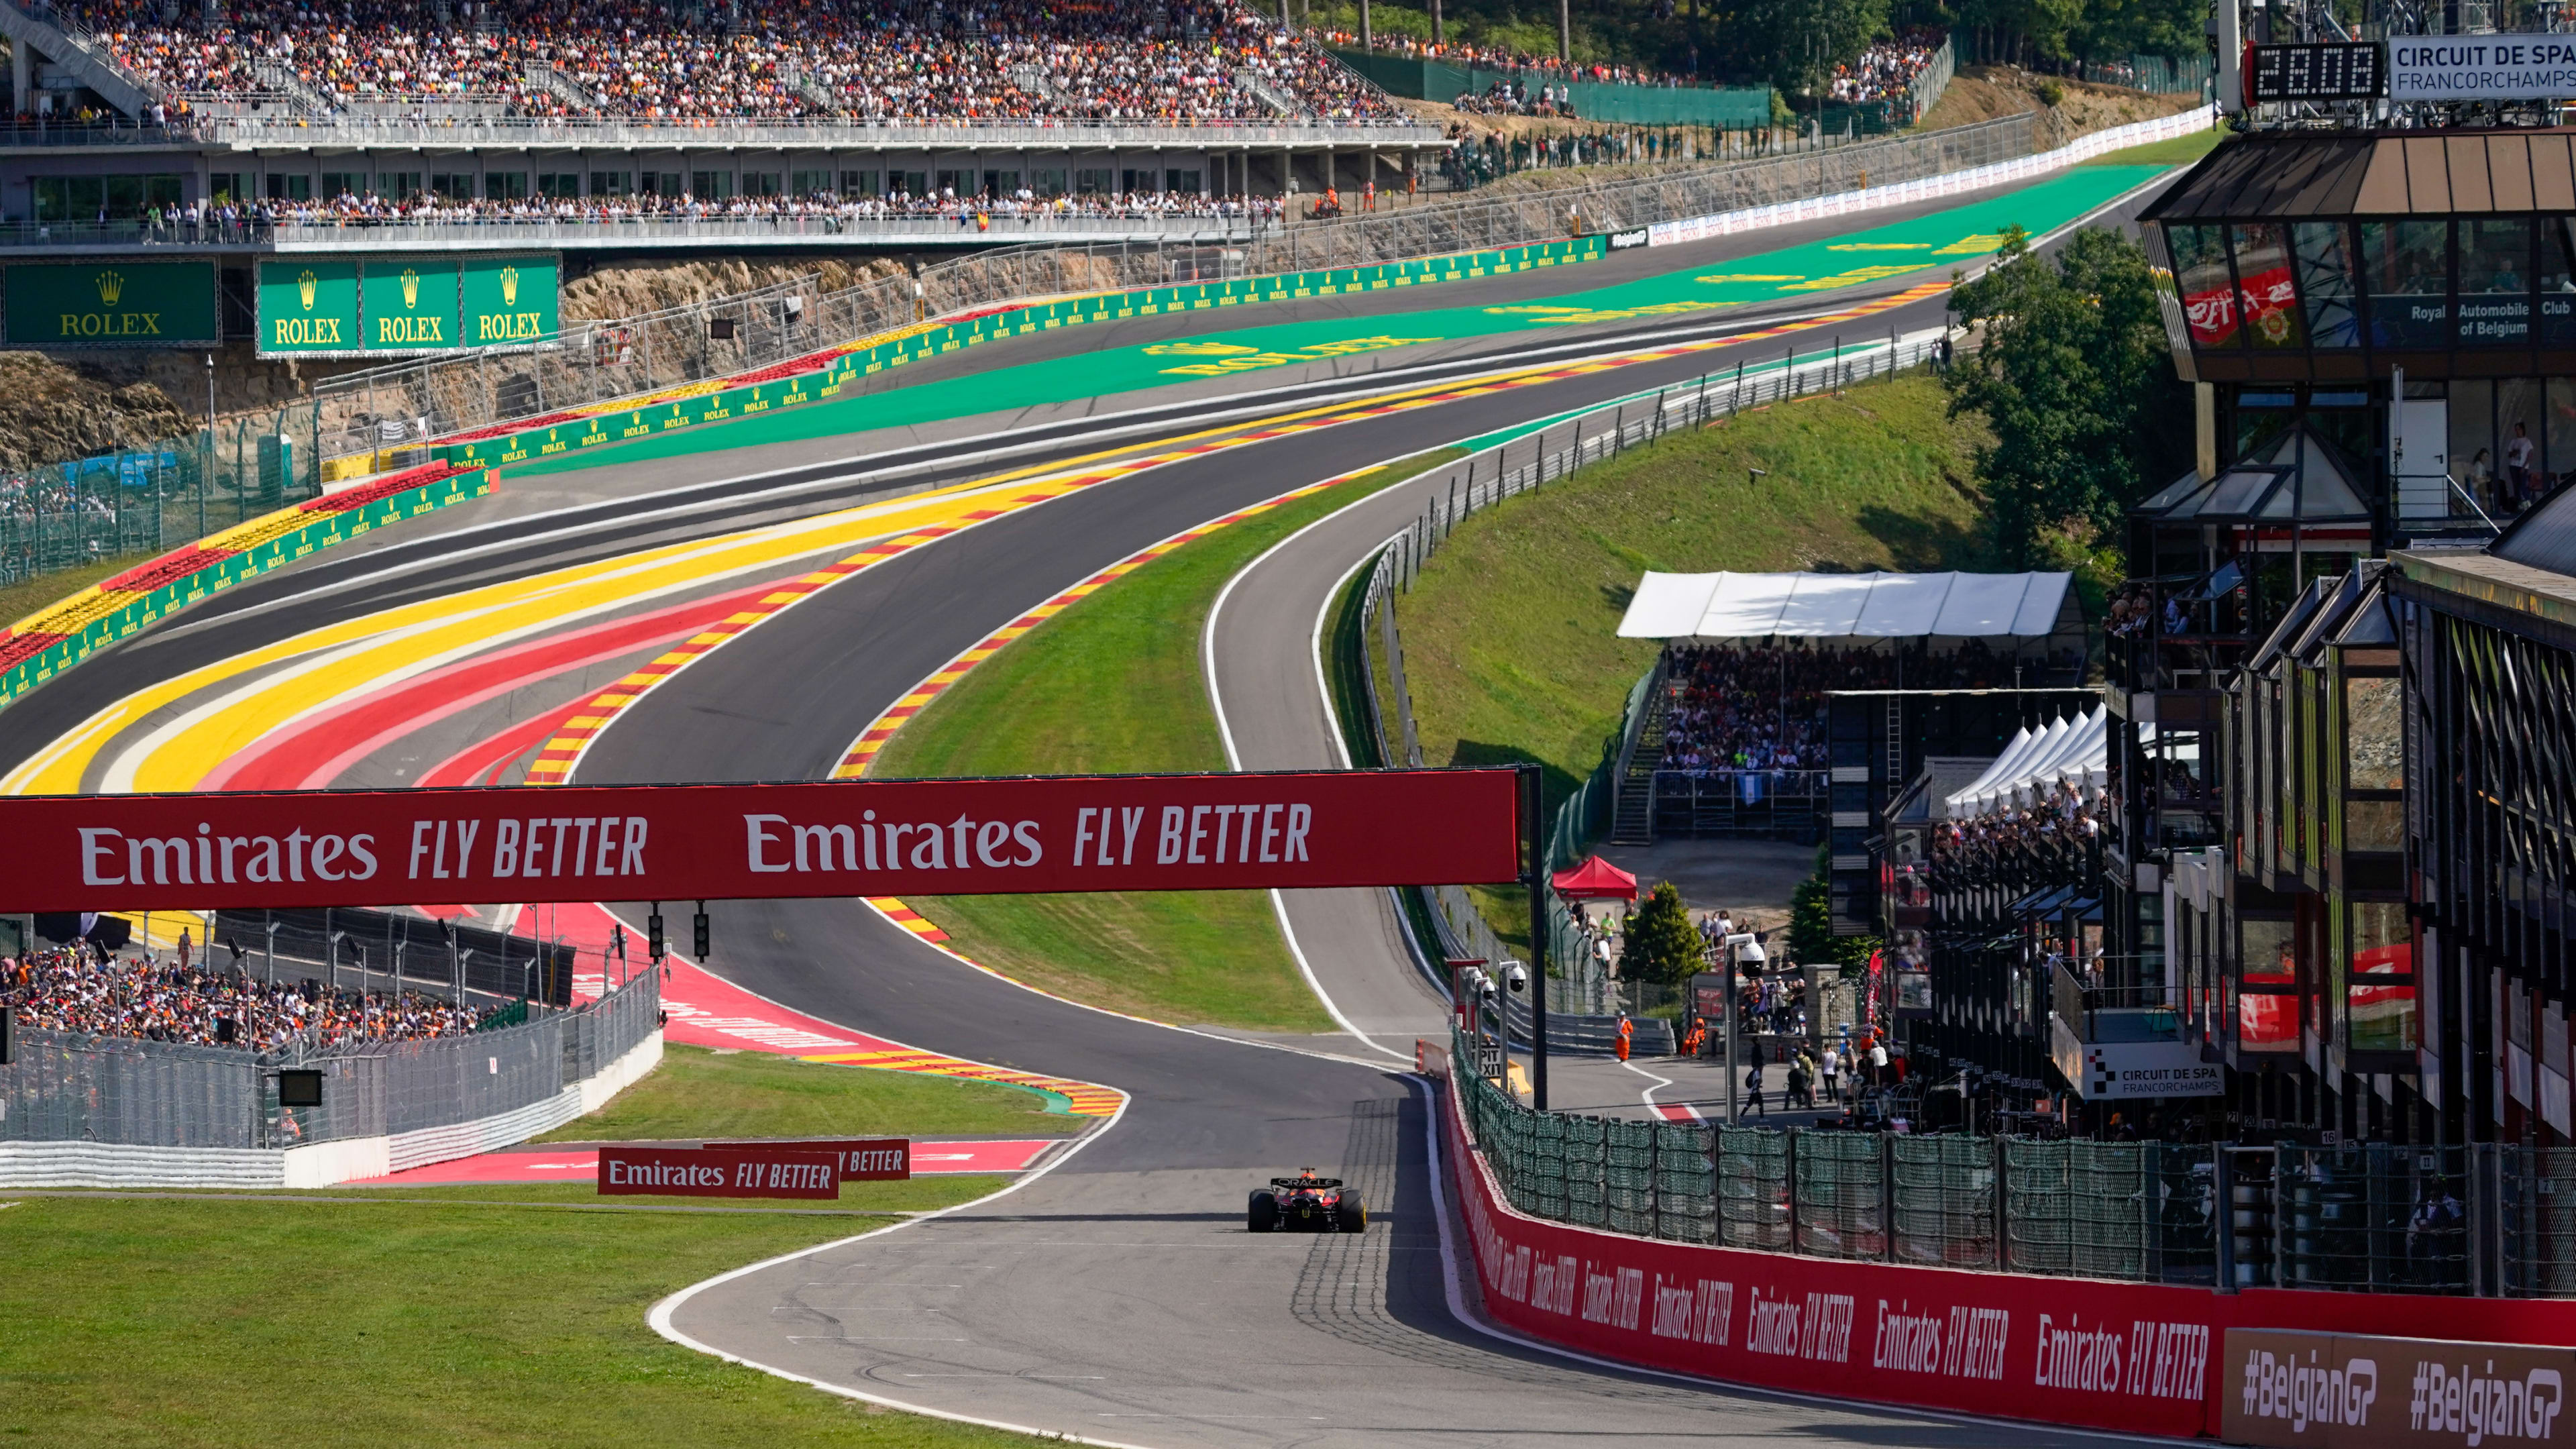 Circuit of Spa-Francorchamps during the F1 Rolex Belgian Grand Prix 2022 on August 28th, 2022 in